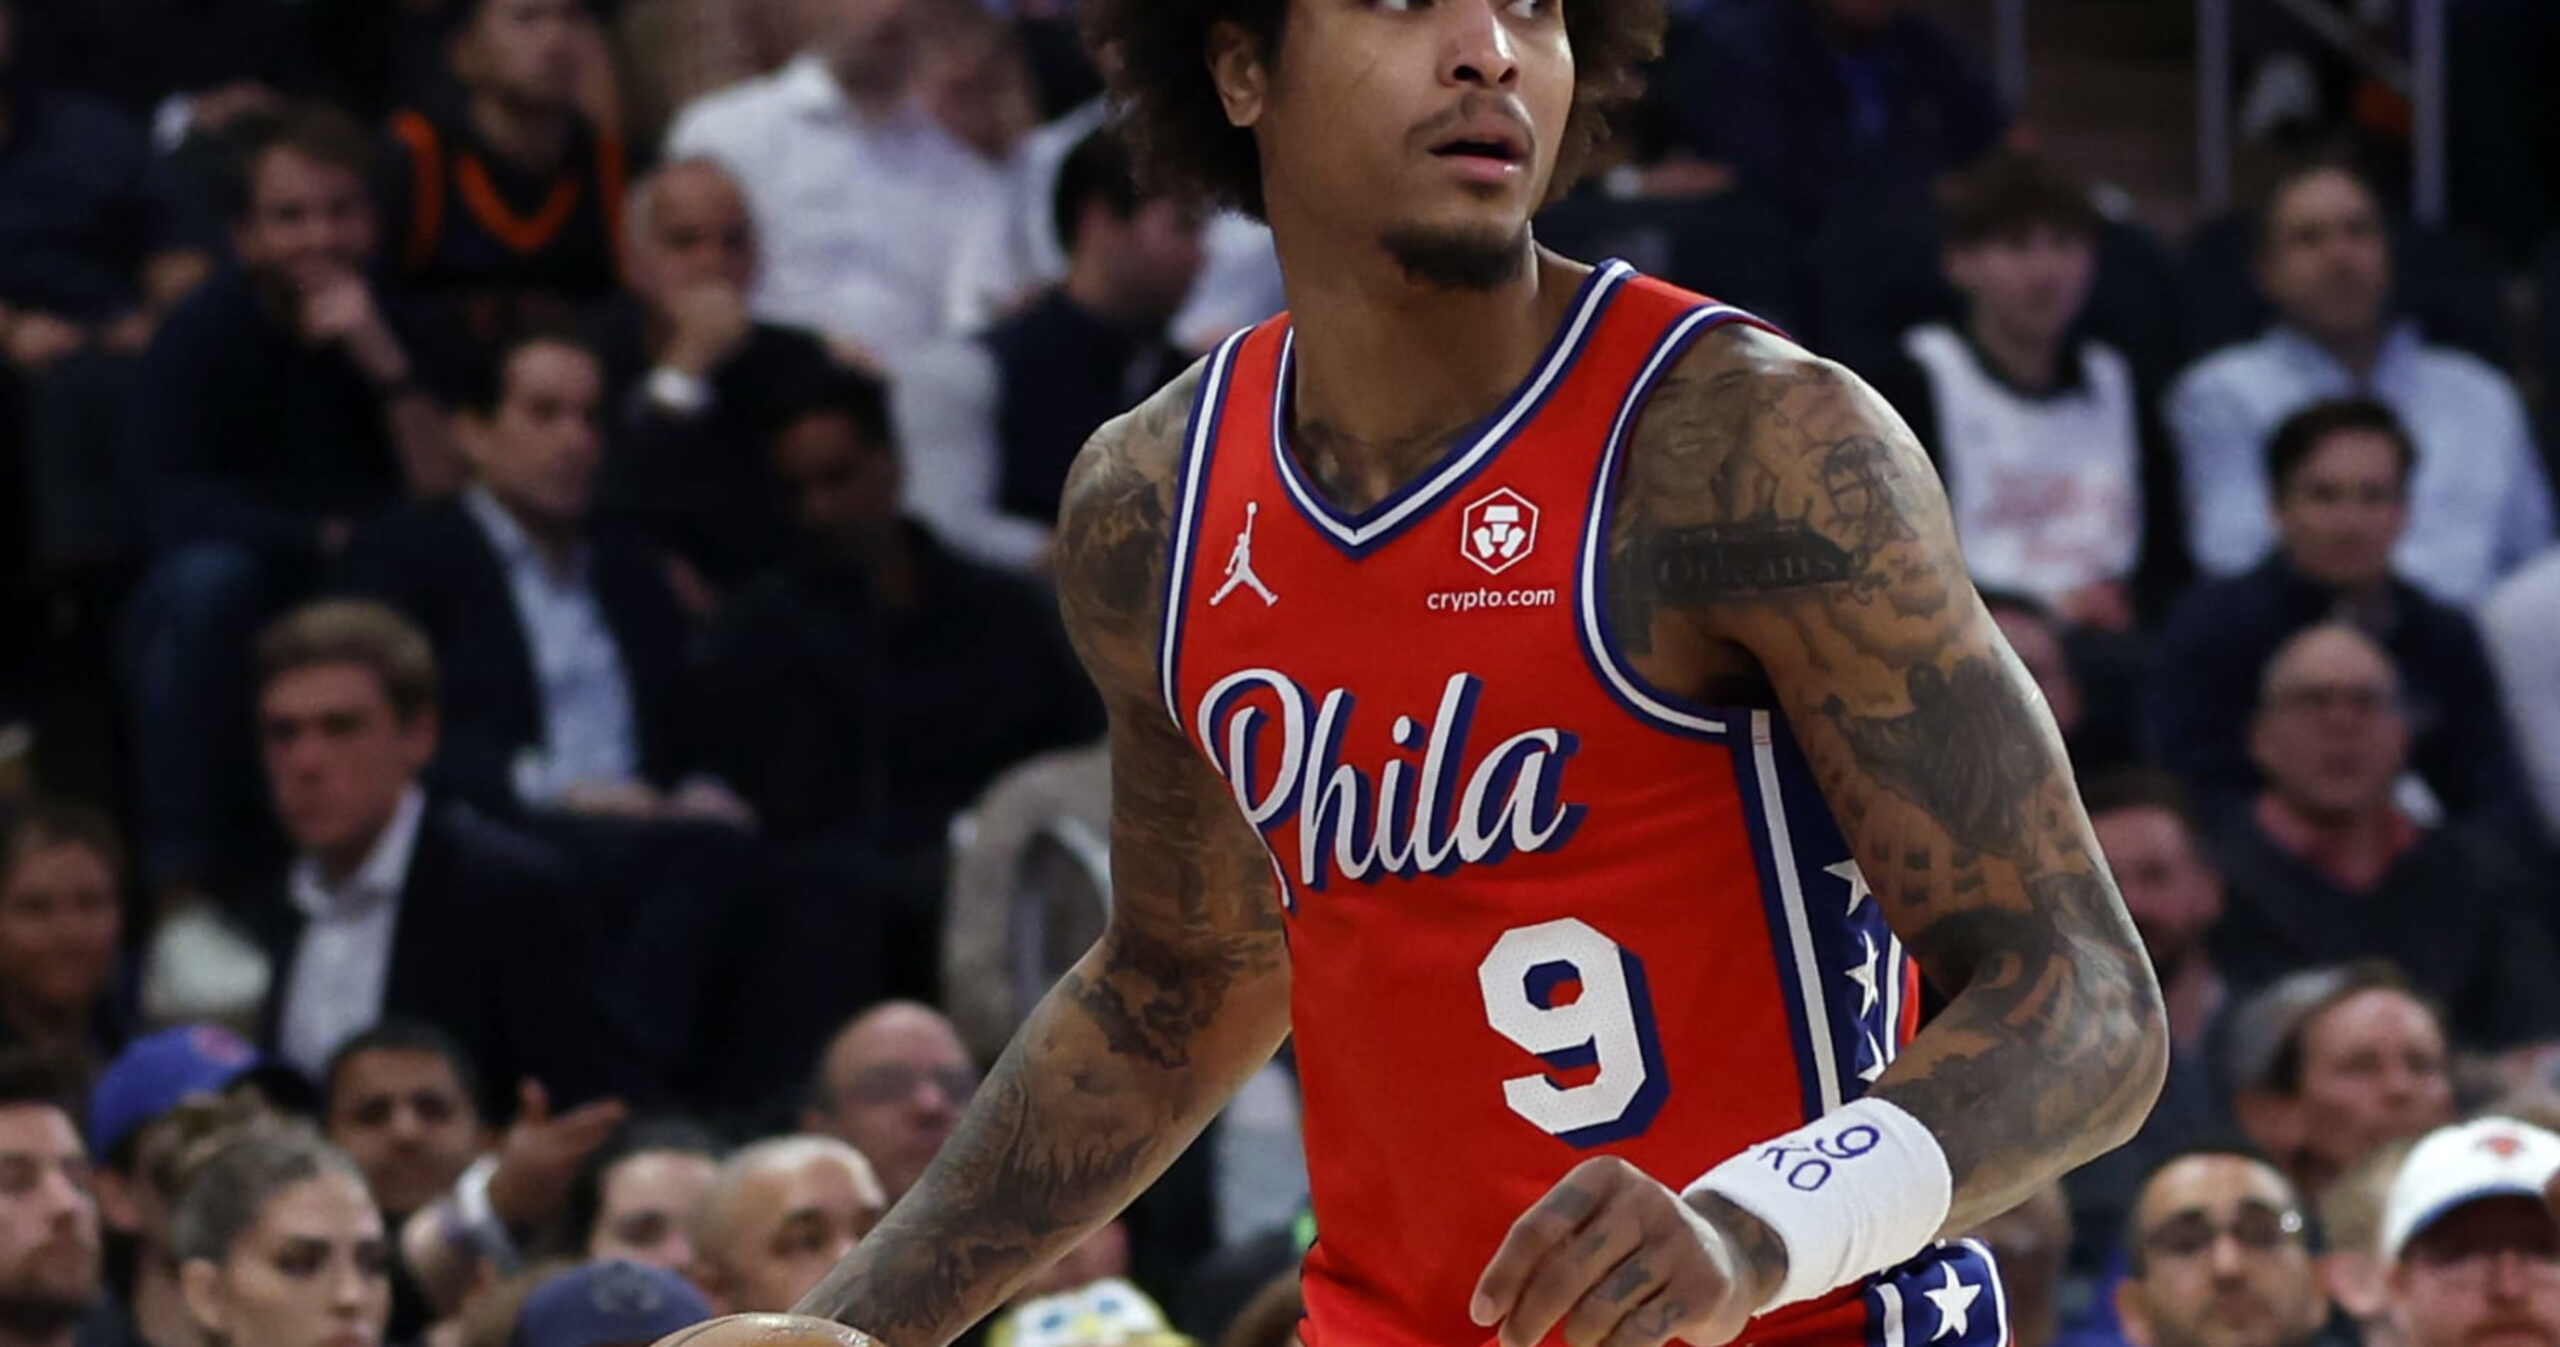 Record: Kelly Oubre Jr.’s Automobile Smash After 76ers Game Subject of Interior Police Probe